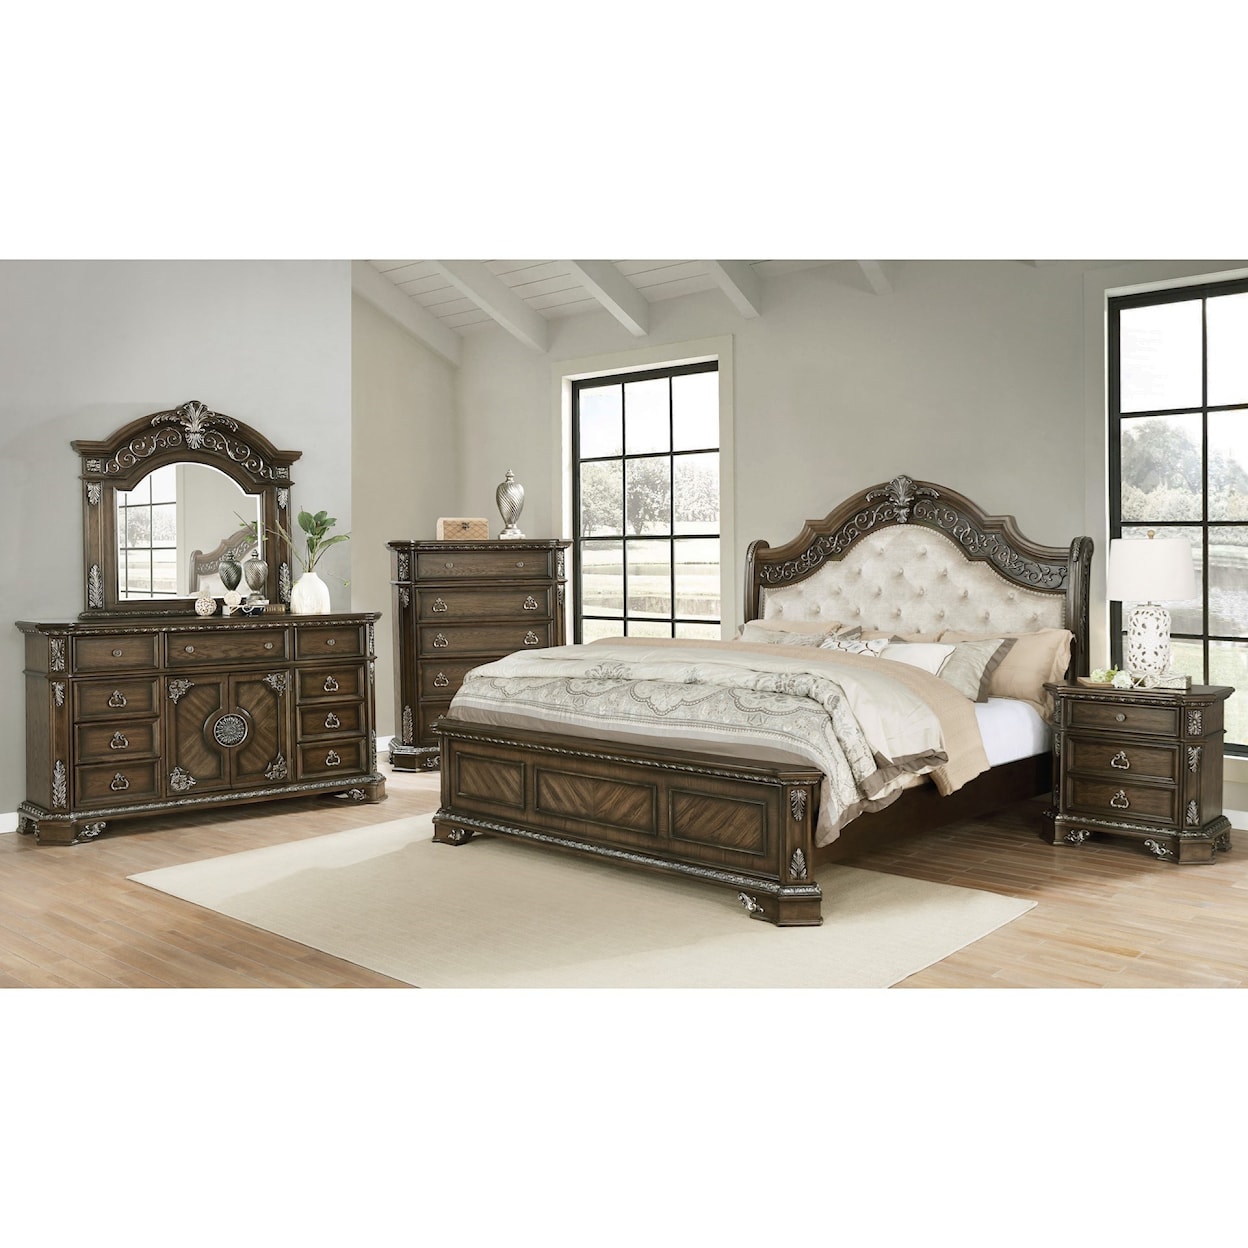 Avalon Furniture B01920 Queen Bedroom Group